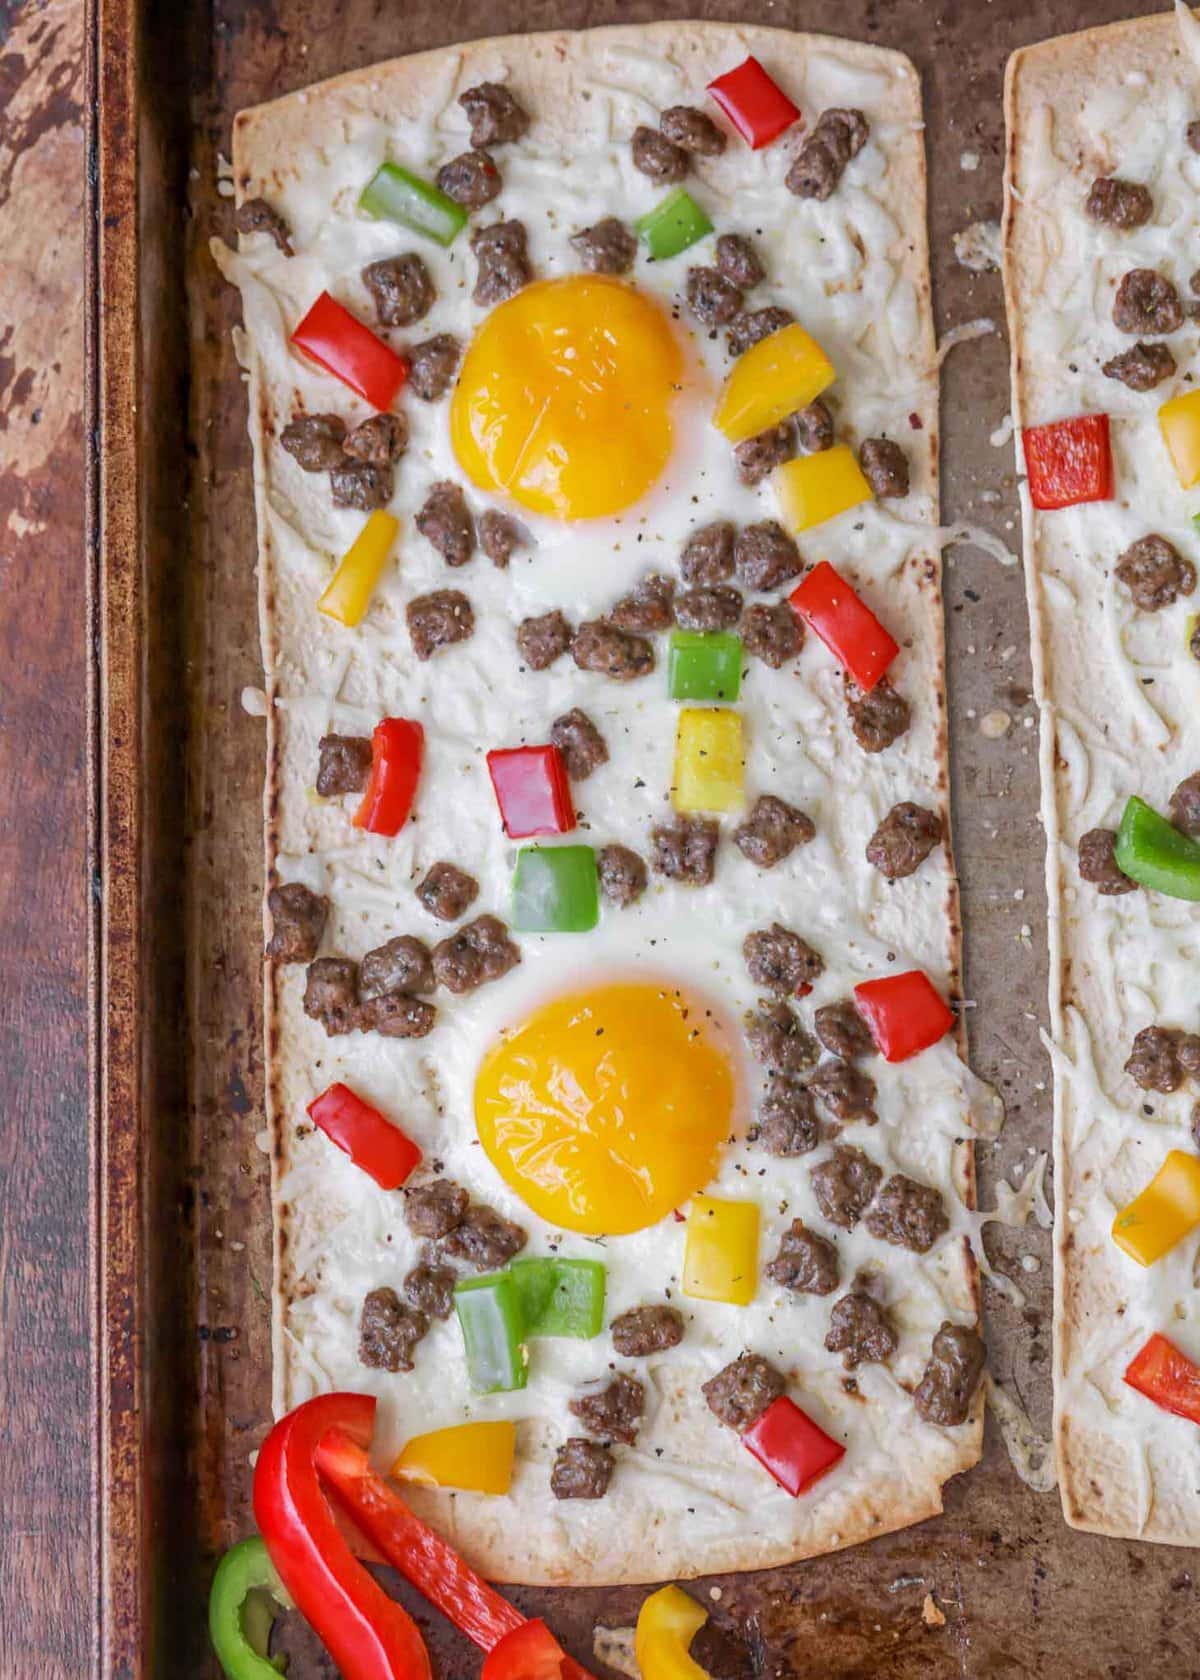 Delicious Healthy Flatbread Breakfast Pizzas topped with sausage and peppers.